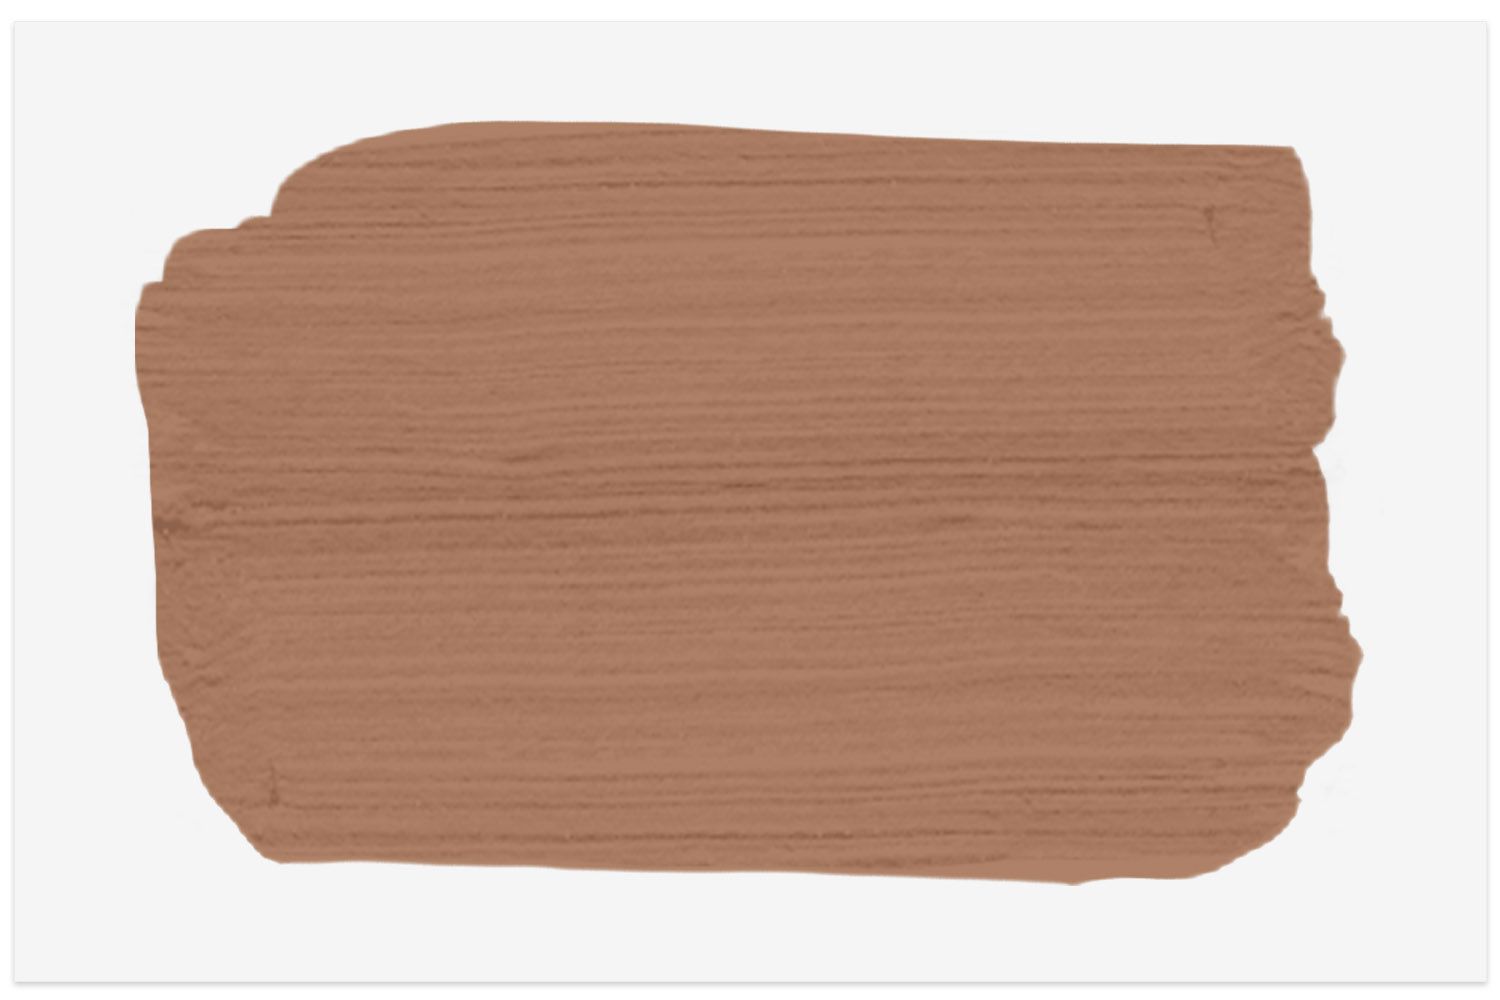 Cider Spice paint swatch from Behr